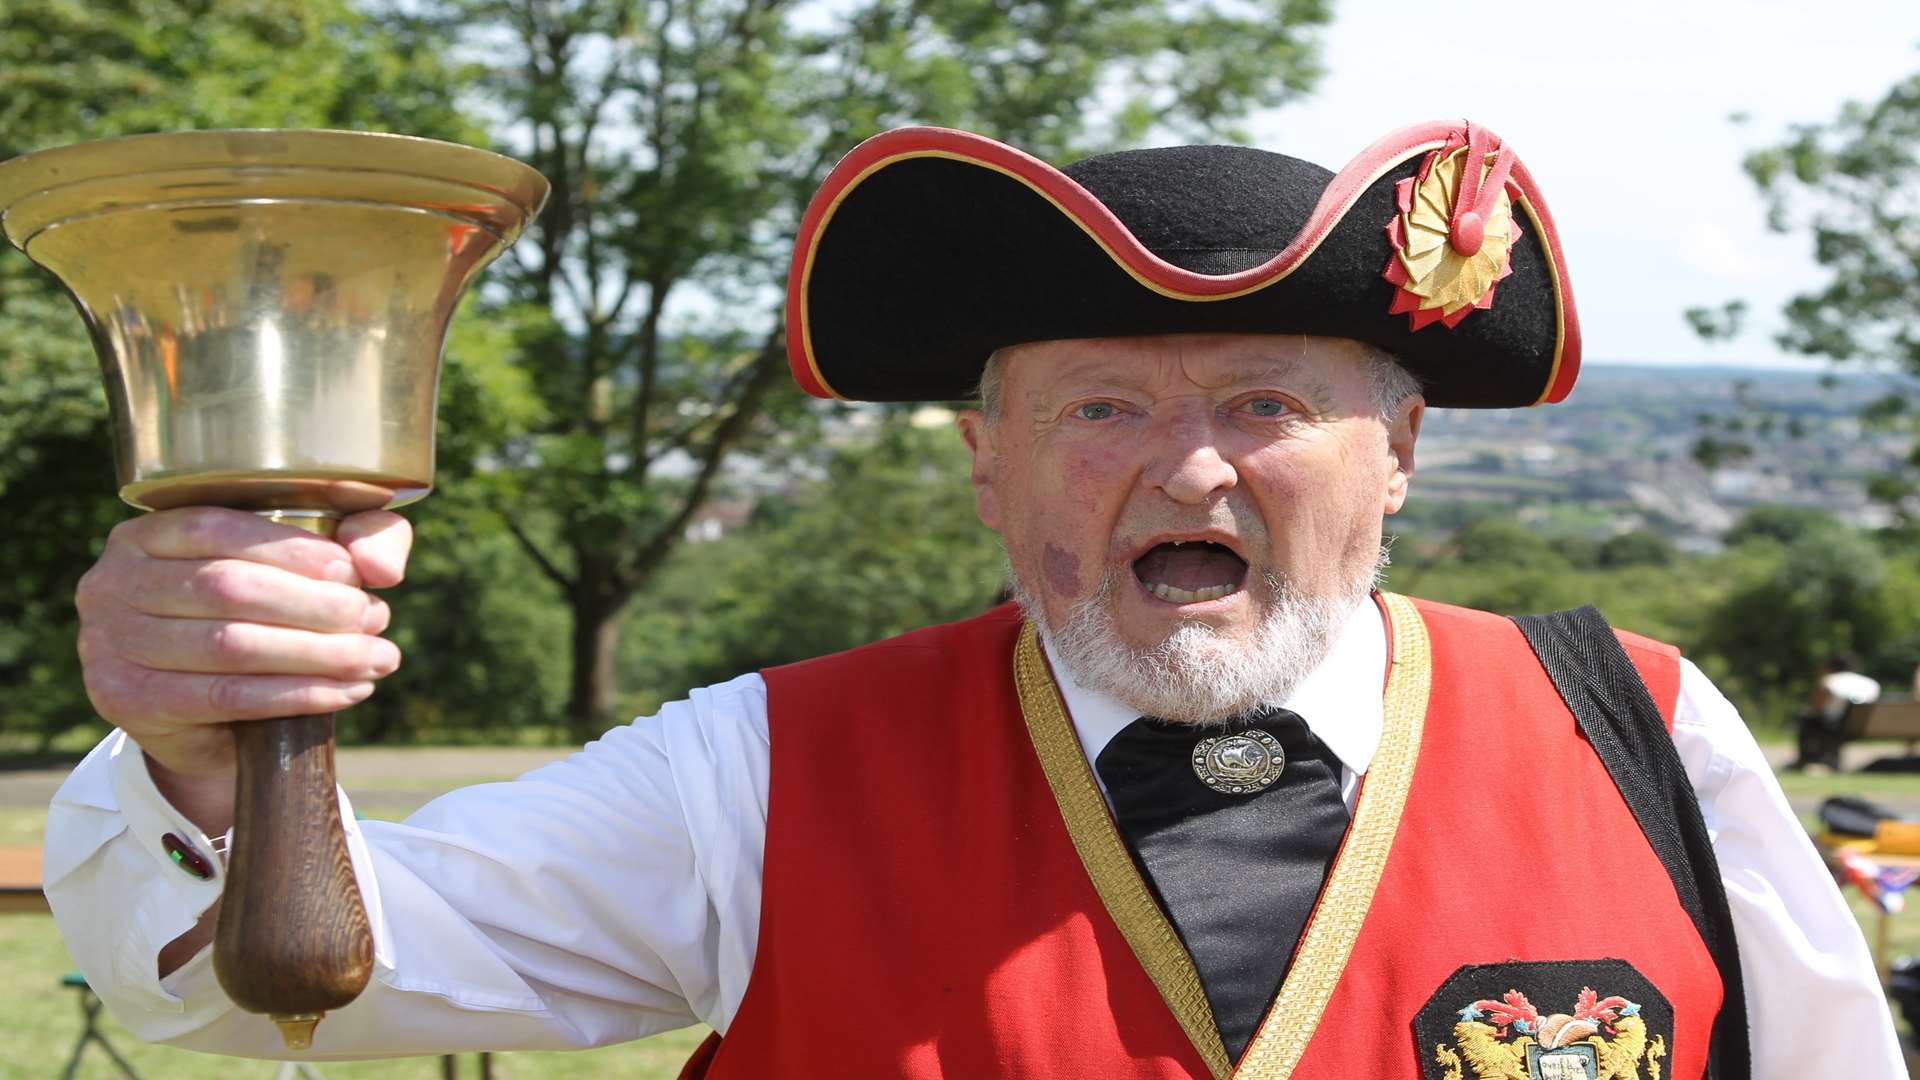 Town crier Robin Burfoot died in March